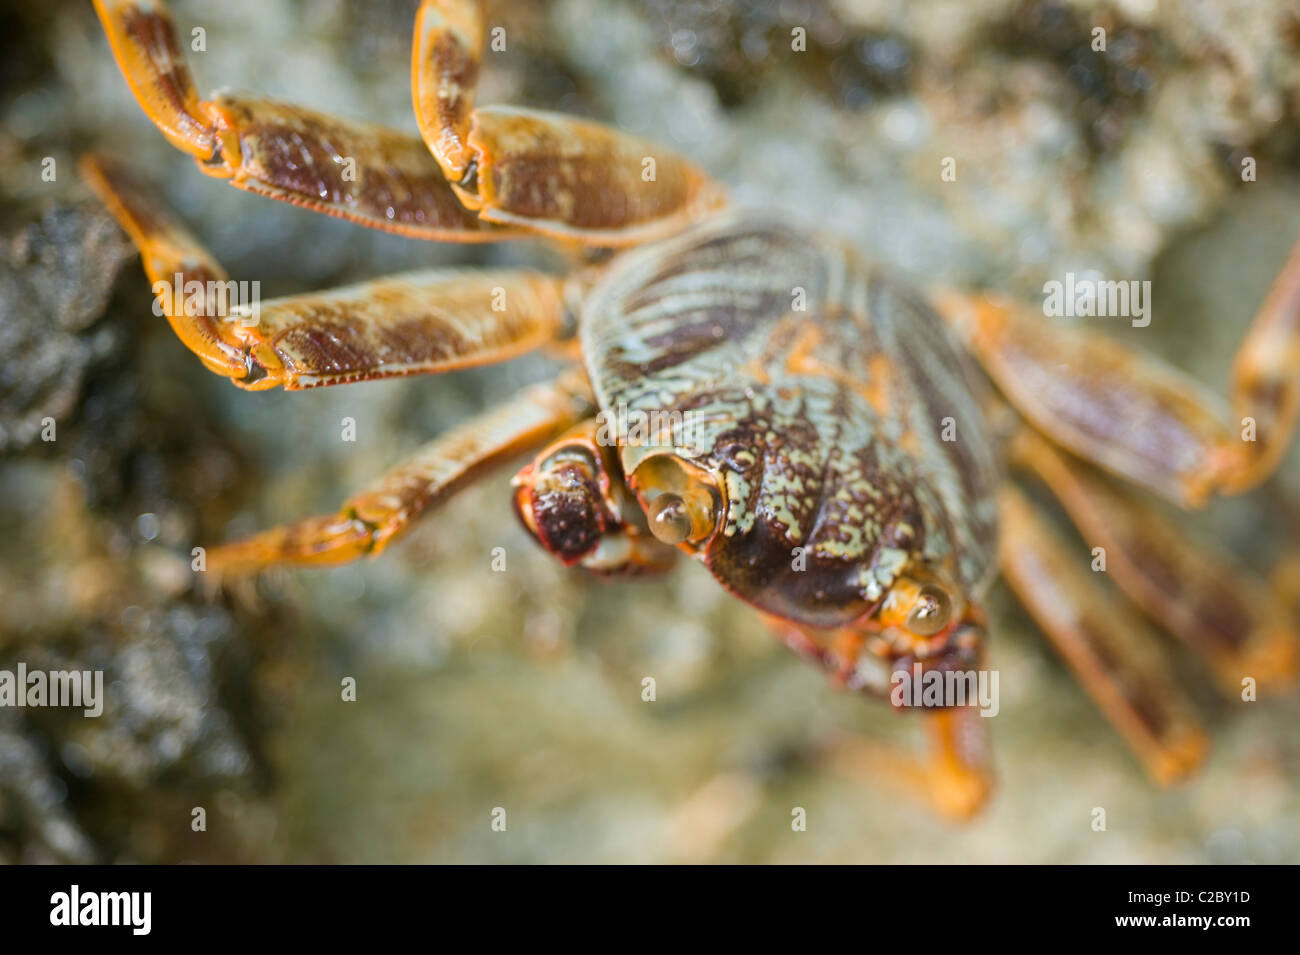 Red Sea swimming crab clinging to a rock out of the water Stock Photo